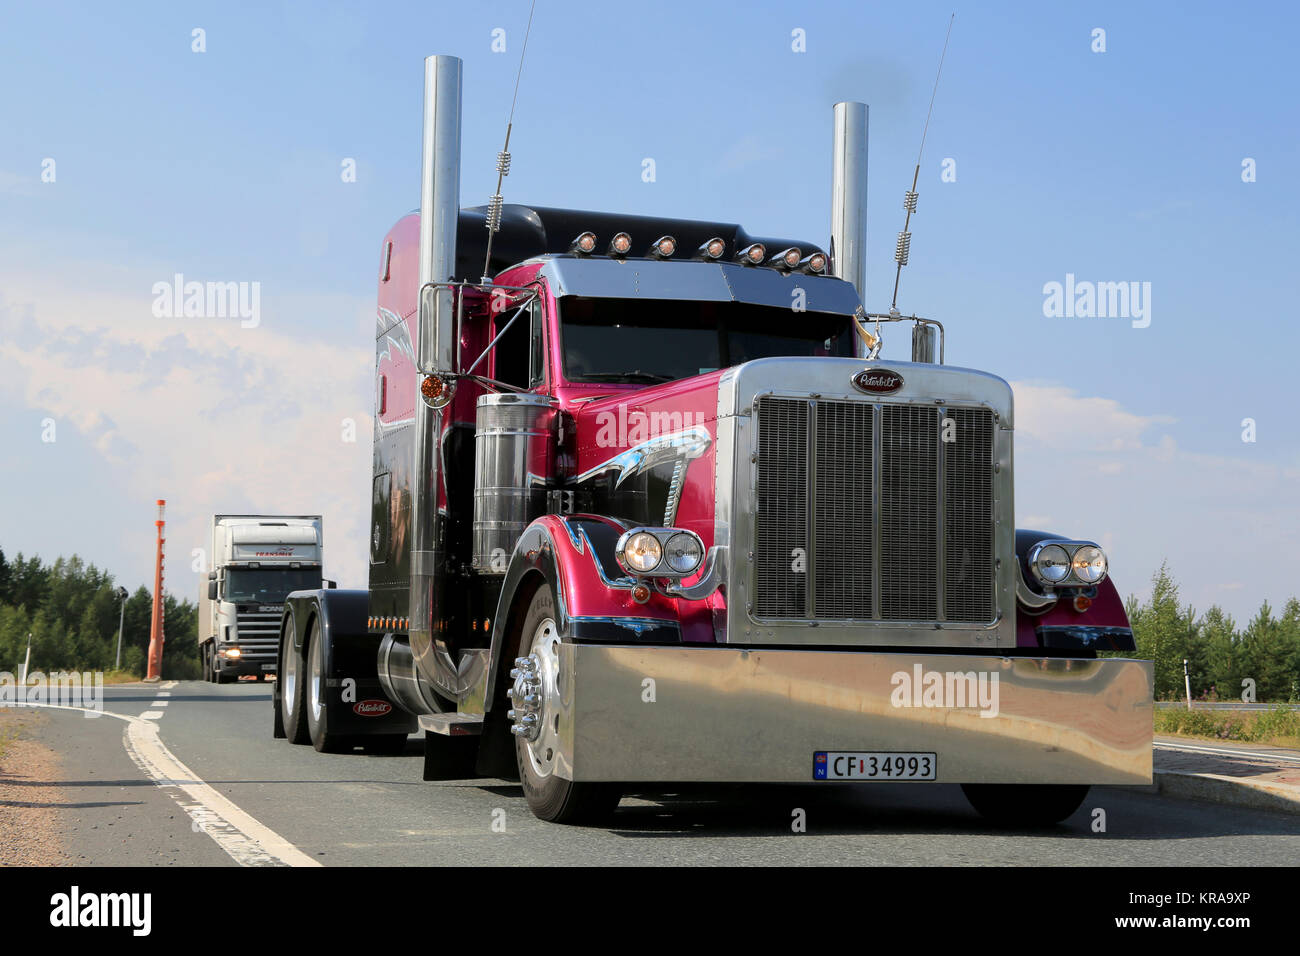 LEMPAALA, FINLAND - AUGUST 7, 2014: American Show truck tractor Peterbilt 379 from Norway arrives at Lempaala as part of the truck convoy to Power Tru Stock Photo